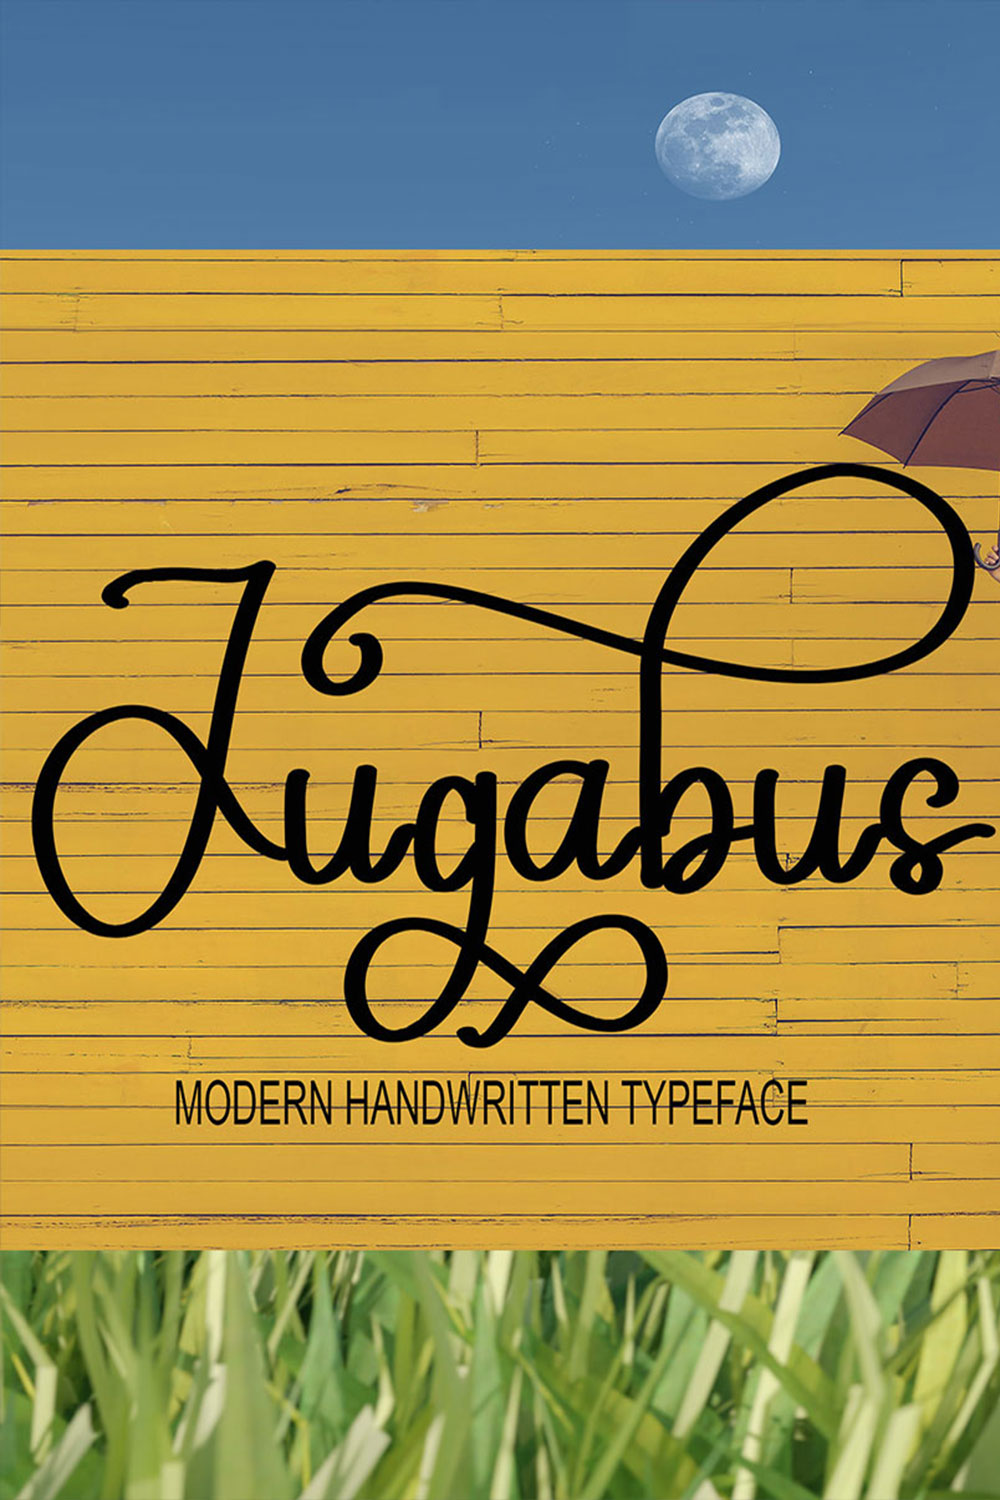 An image with text showing the exquisite Jugabus font.